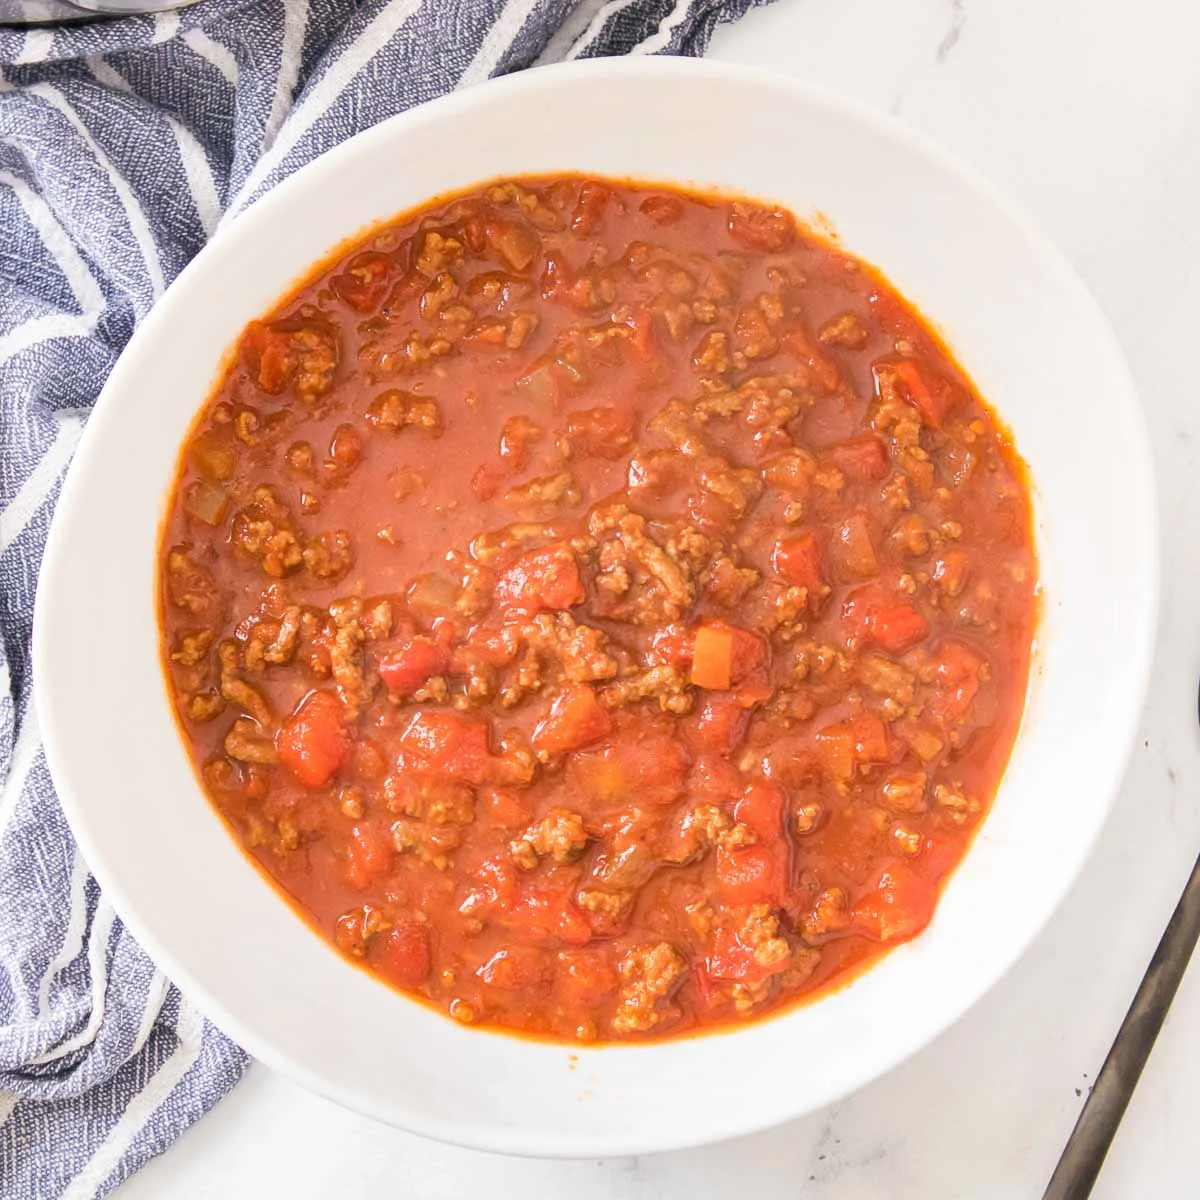 Bowl of Instant Pot Chili Without Beans